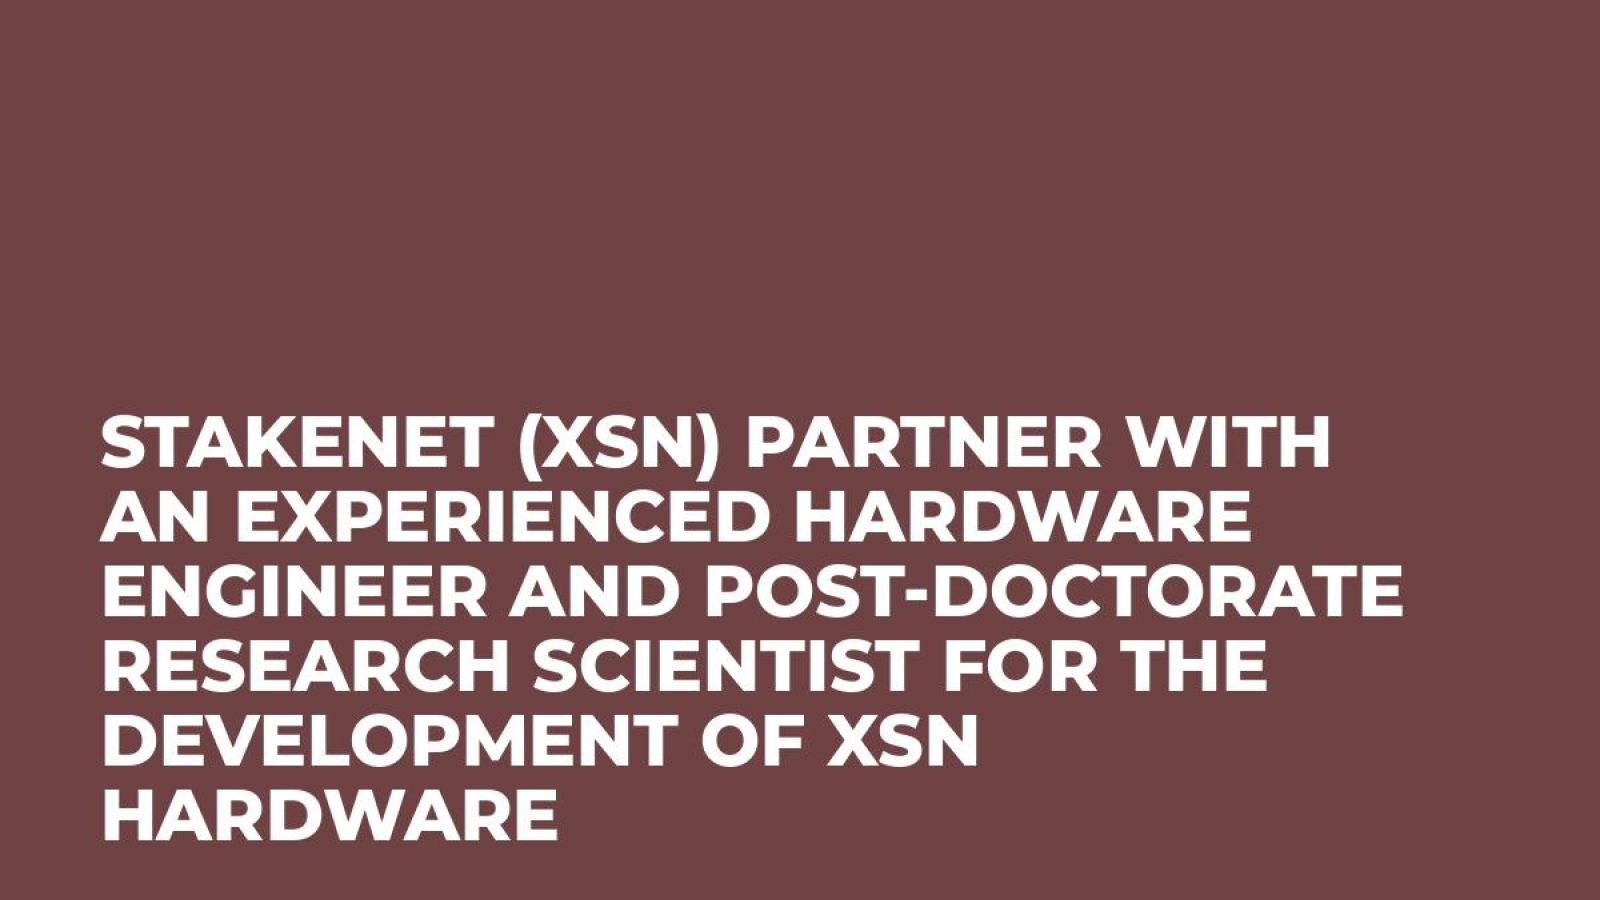 Stakenet (XSN) partner with an experienced Hardware Engineer and Post-doctorate Research Scientist for the development of XSN Hardware